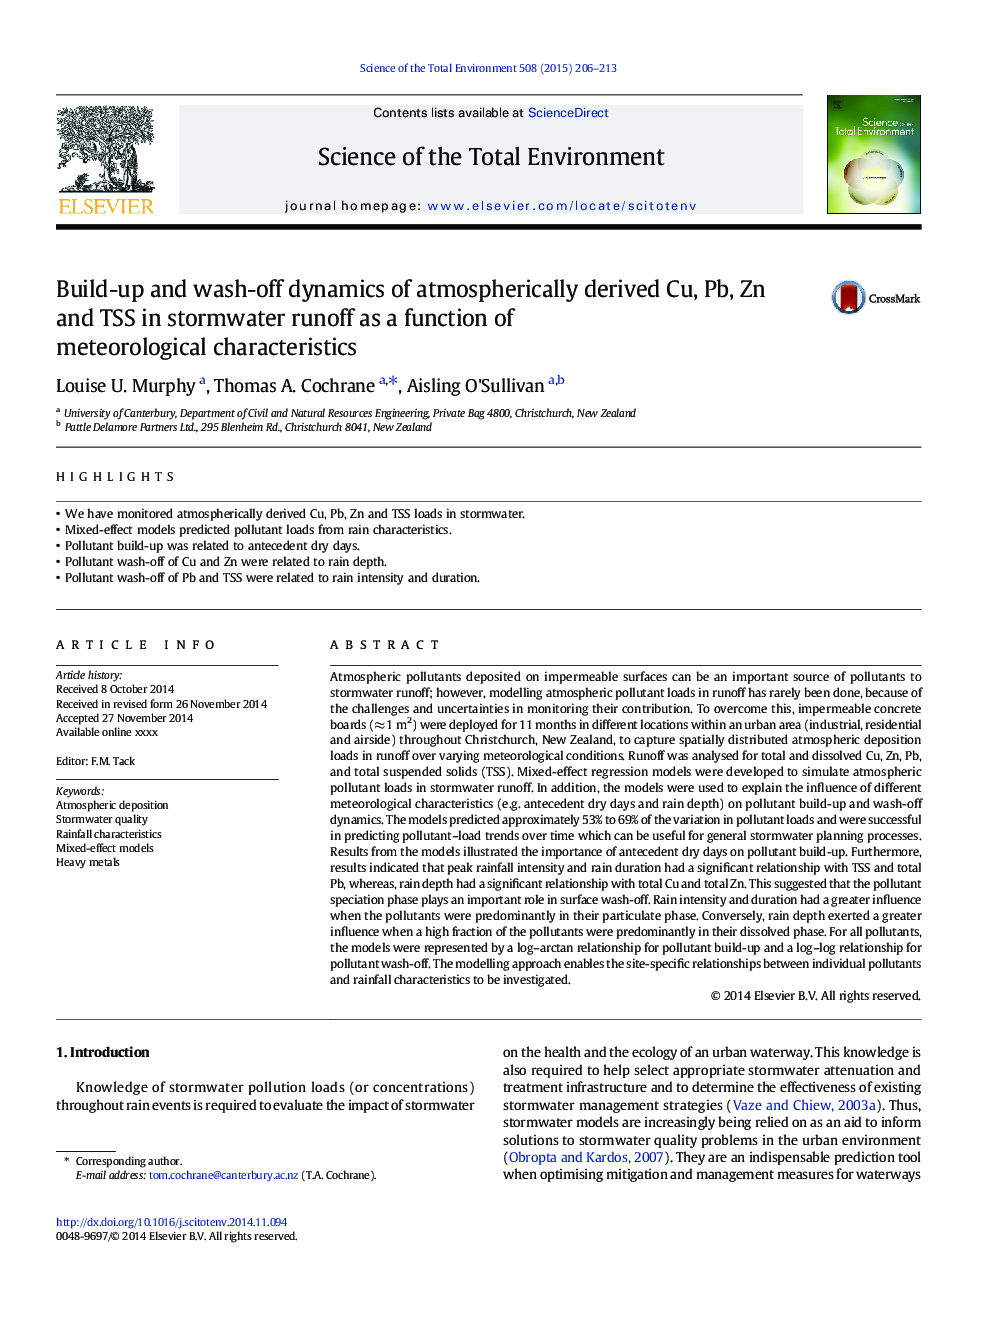 Build-up and wash-off dynamics of atmospherically derived Cu, Pb, Zn and TSS in stormwater runoff as a function of meteorological characteristics